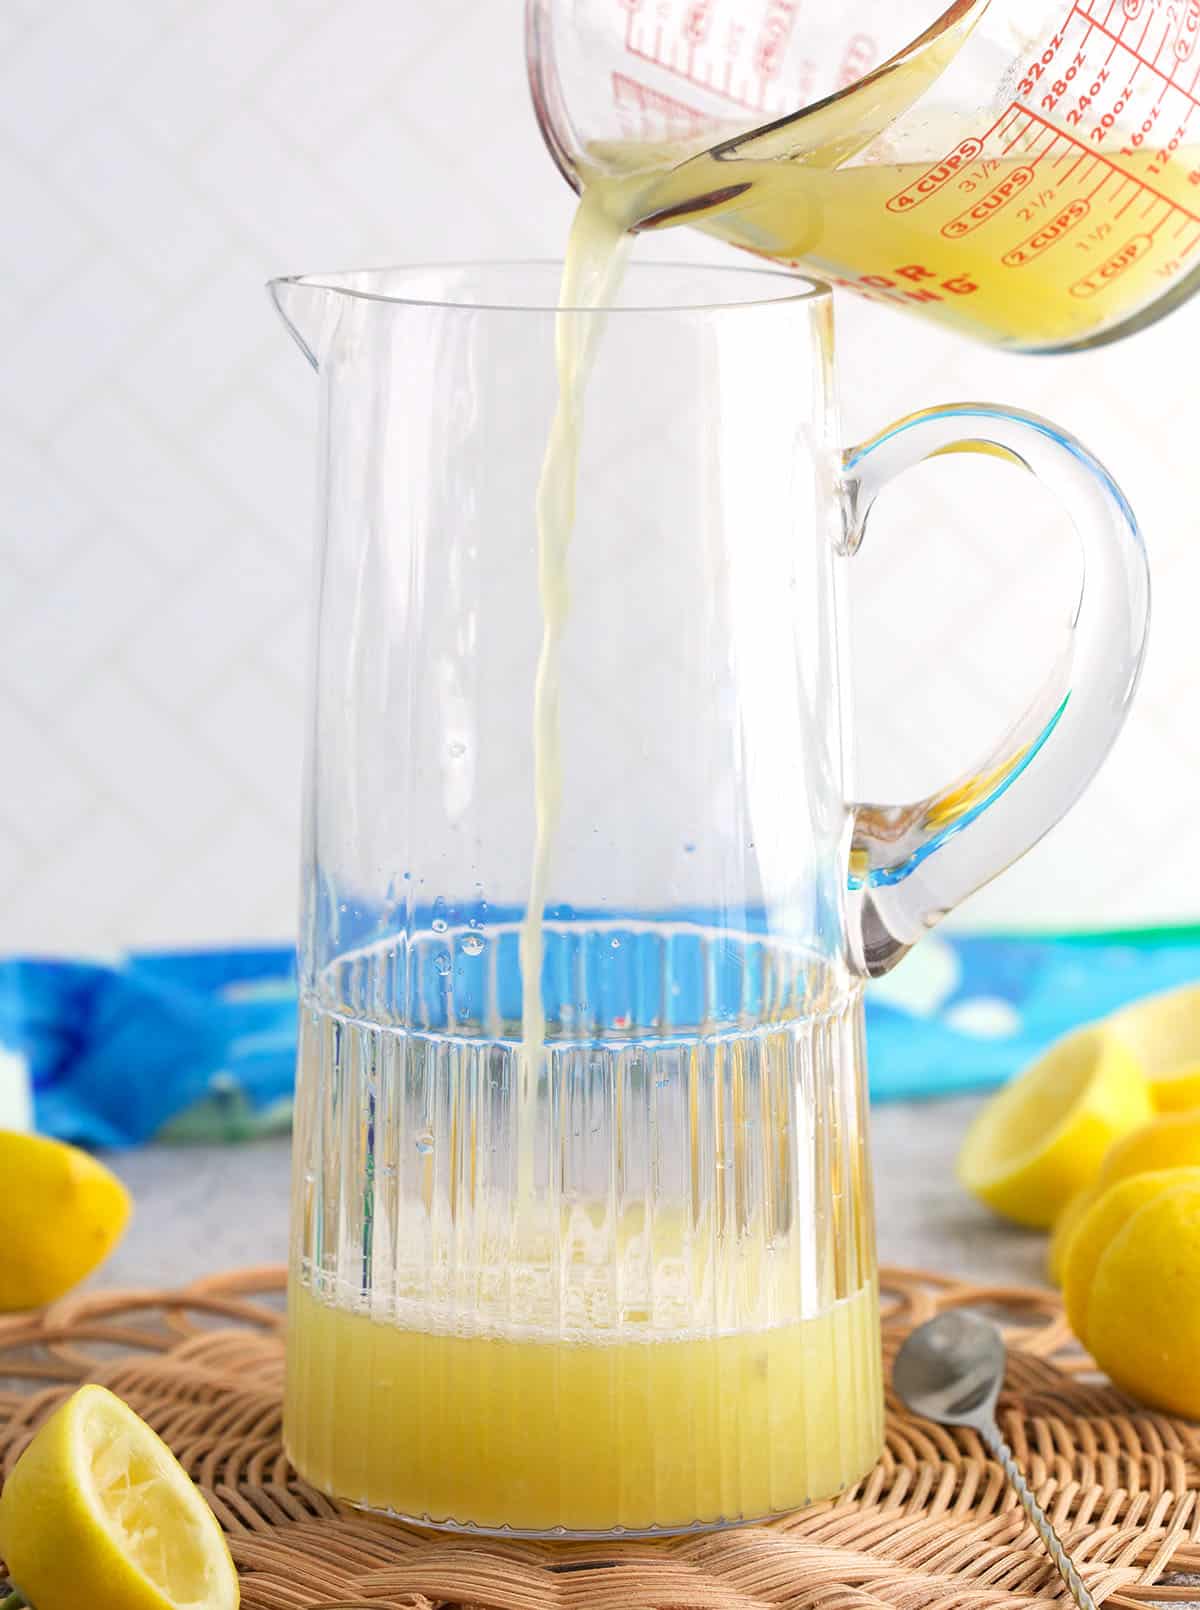 Lemon juice being poured into a glass pitcher.